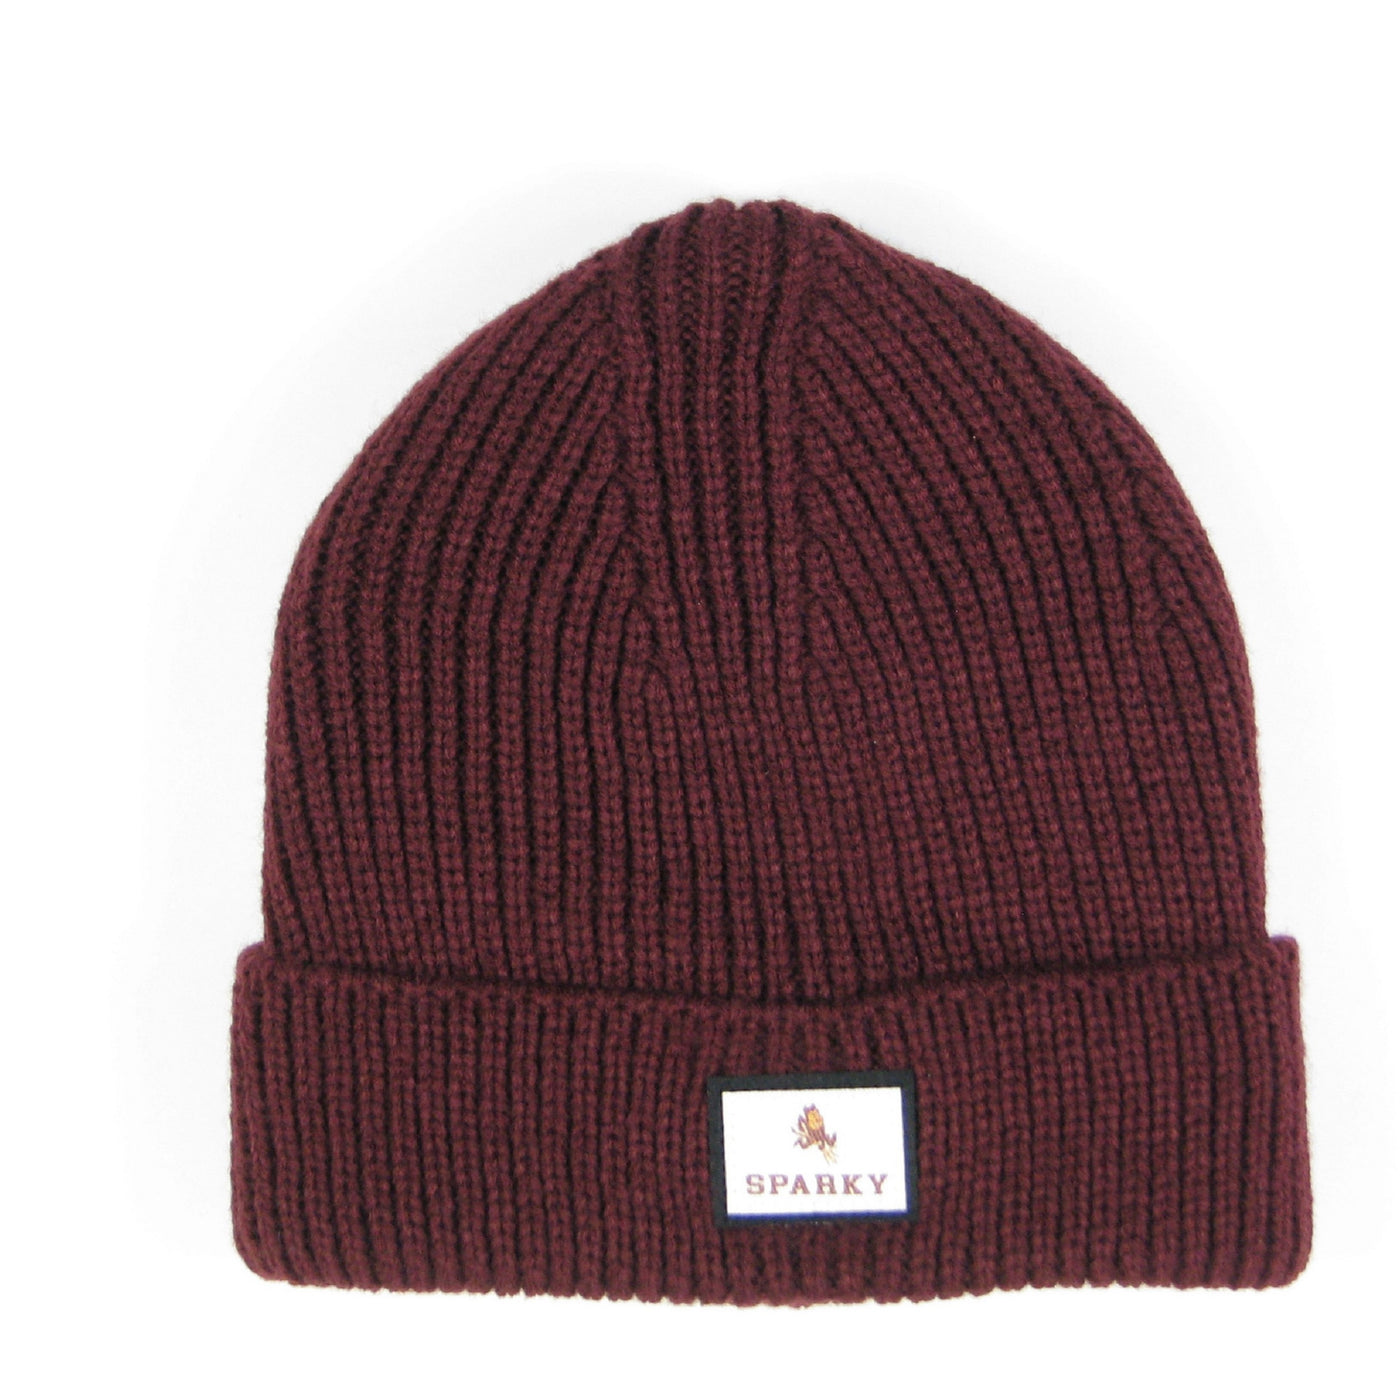 ASU maroon ribbed beanie with a white patch on the cuff saying 'Sparky' underneath Sparky